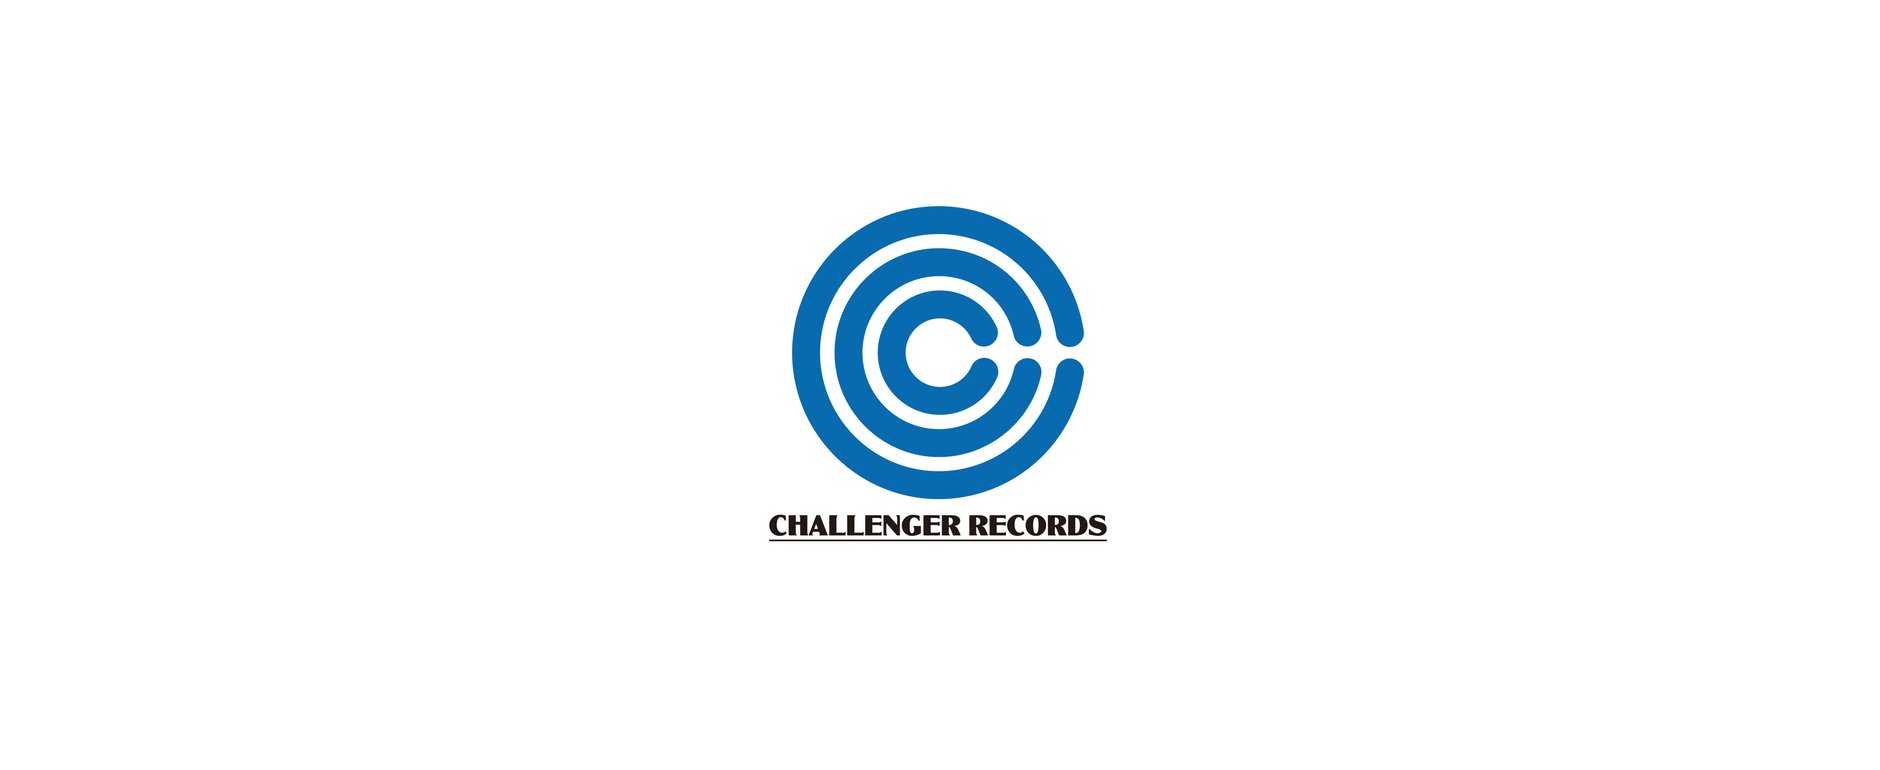 CHALLENGER RECORDS